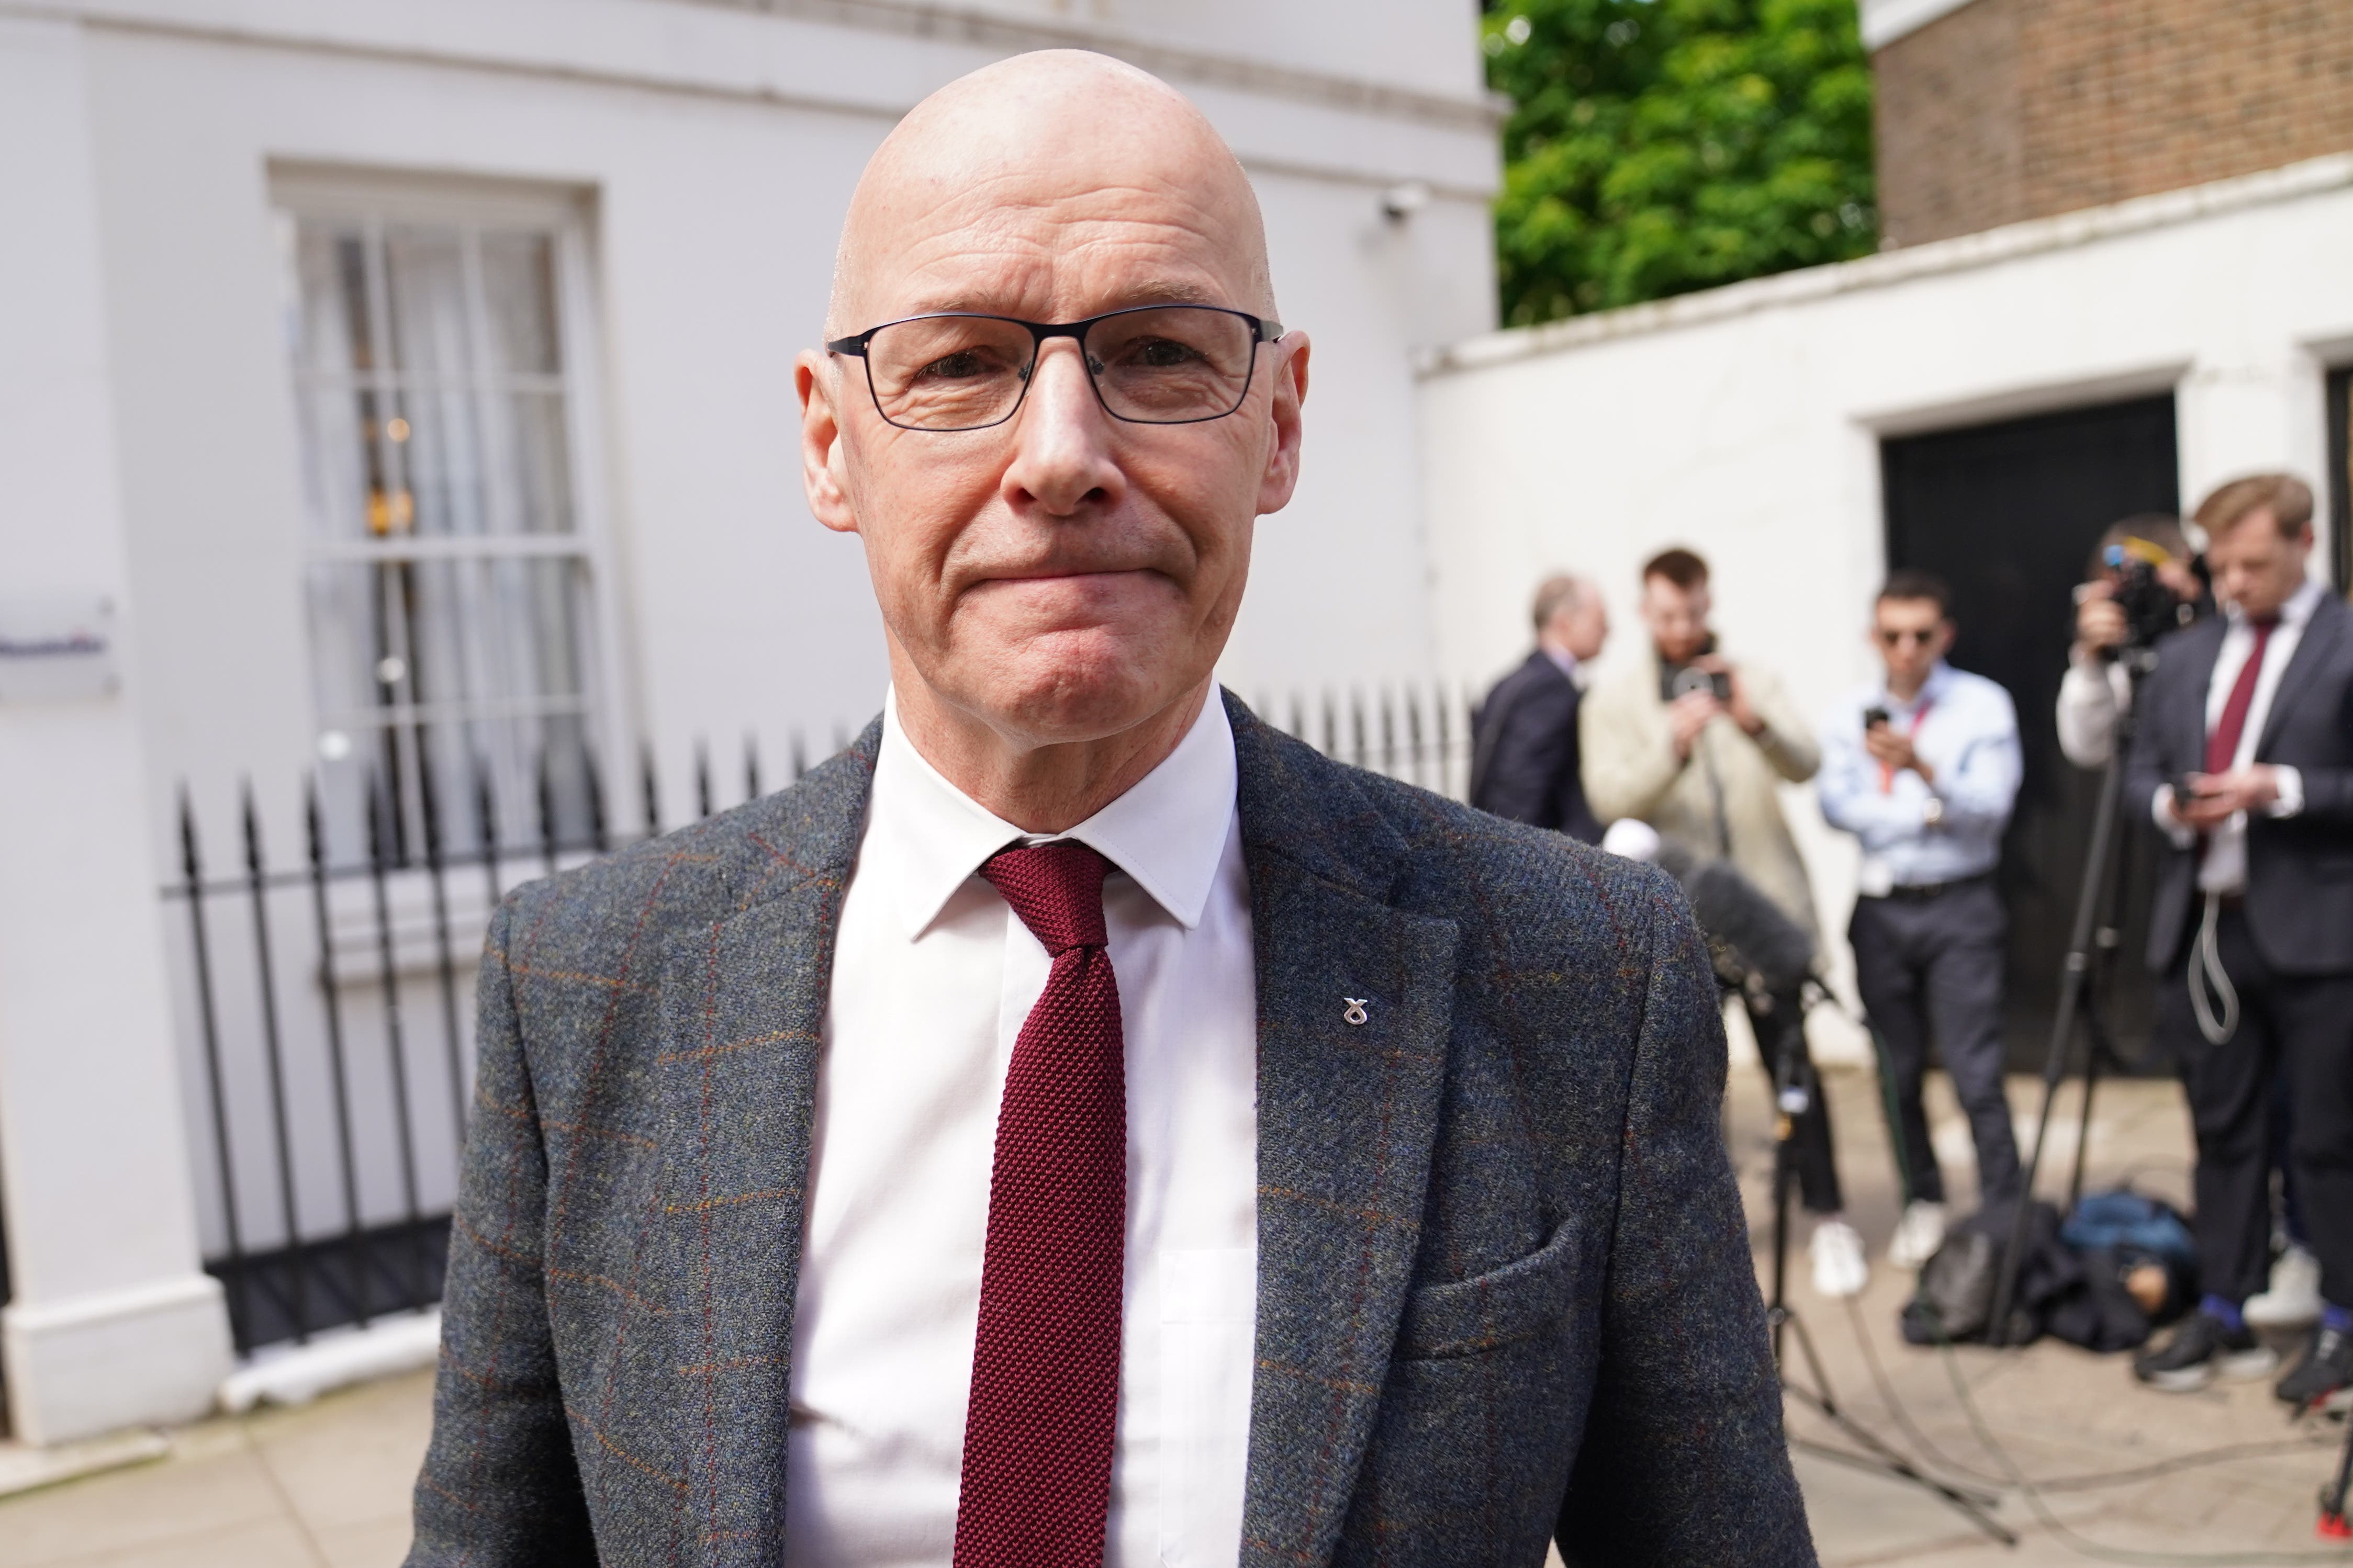 John Swinney has announced he will run to become the next SNP leader and first minister